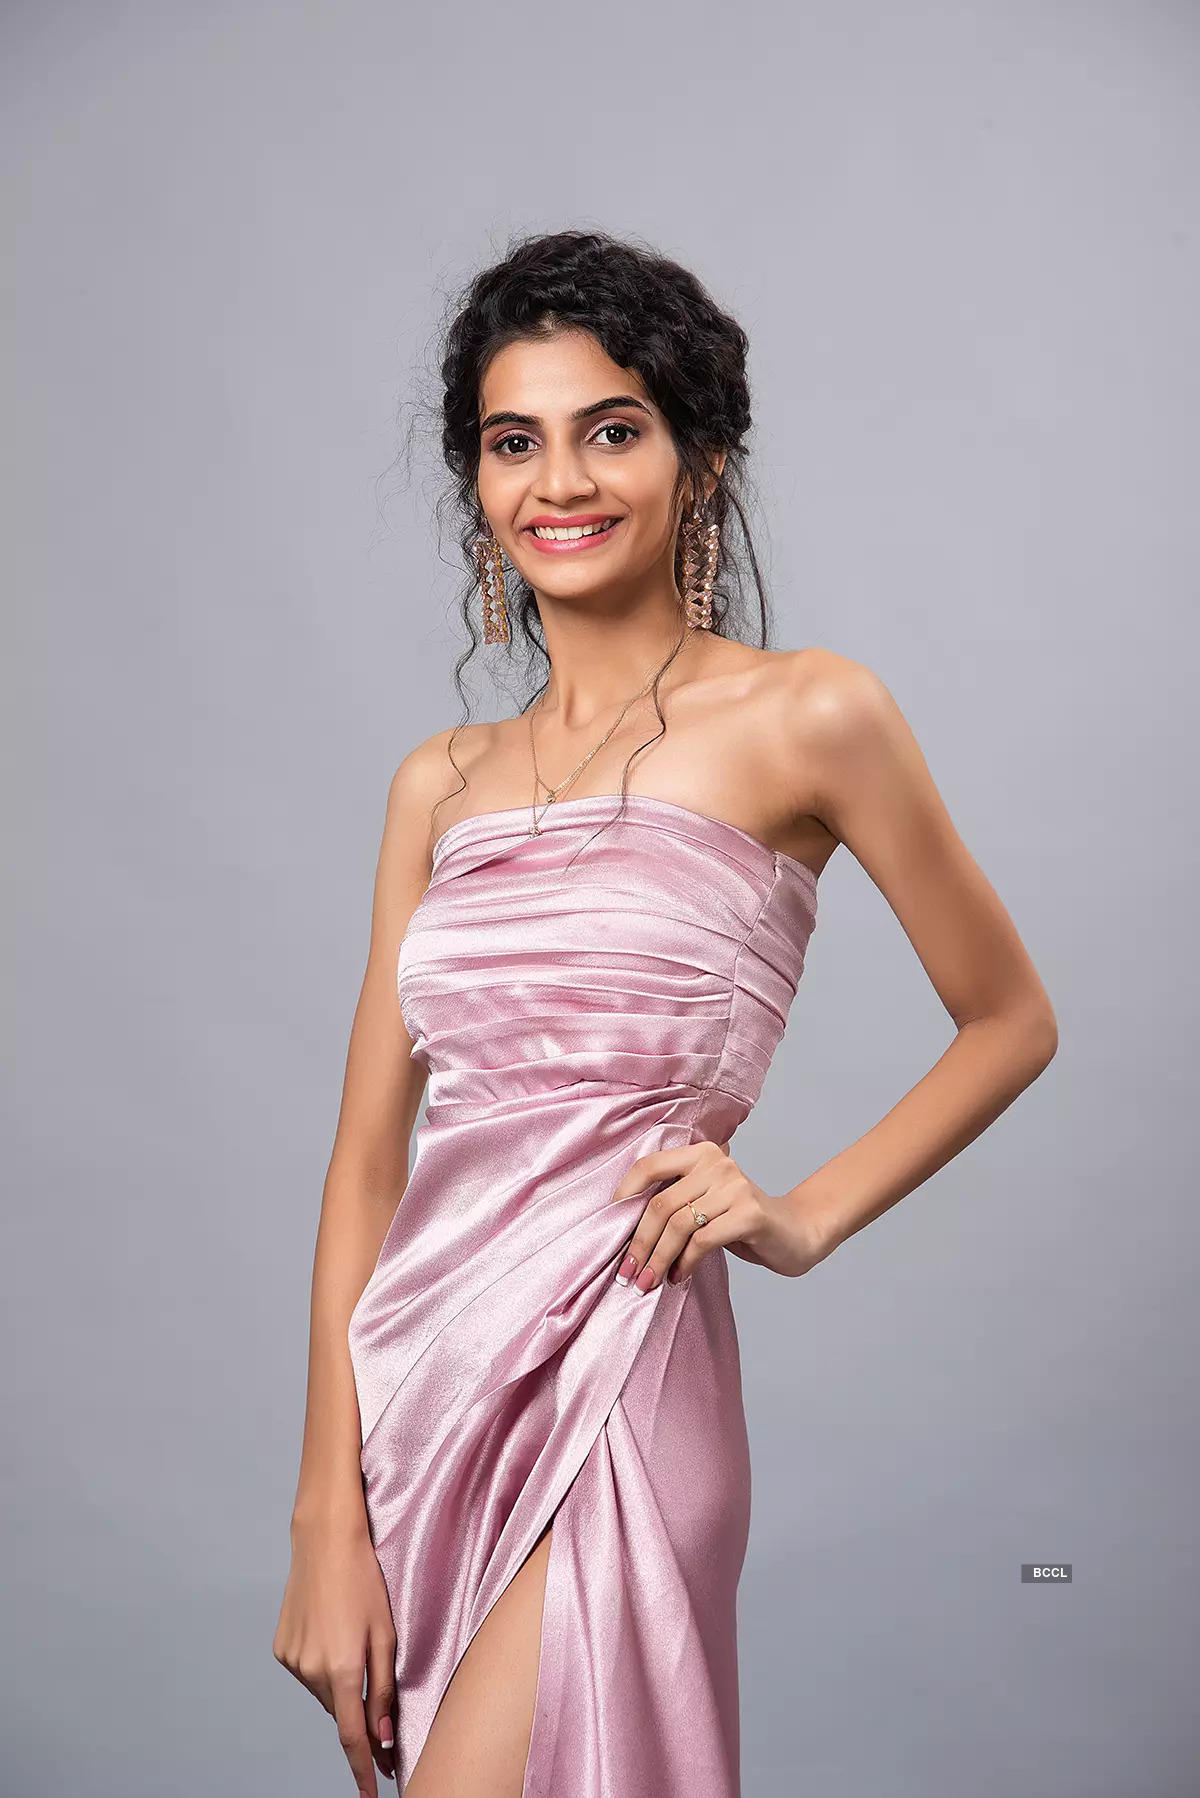 Pictures of Mahika Biyani crowned as Miss Teen Multinational India 2022 at Miss Teen Diva 2021